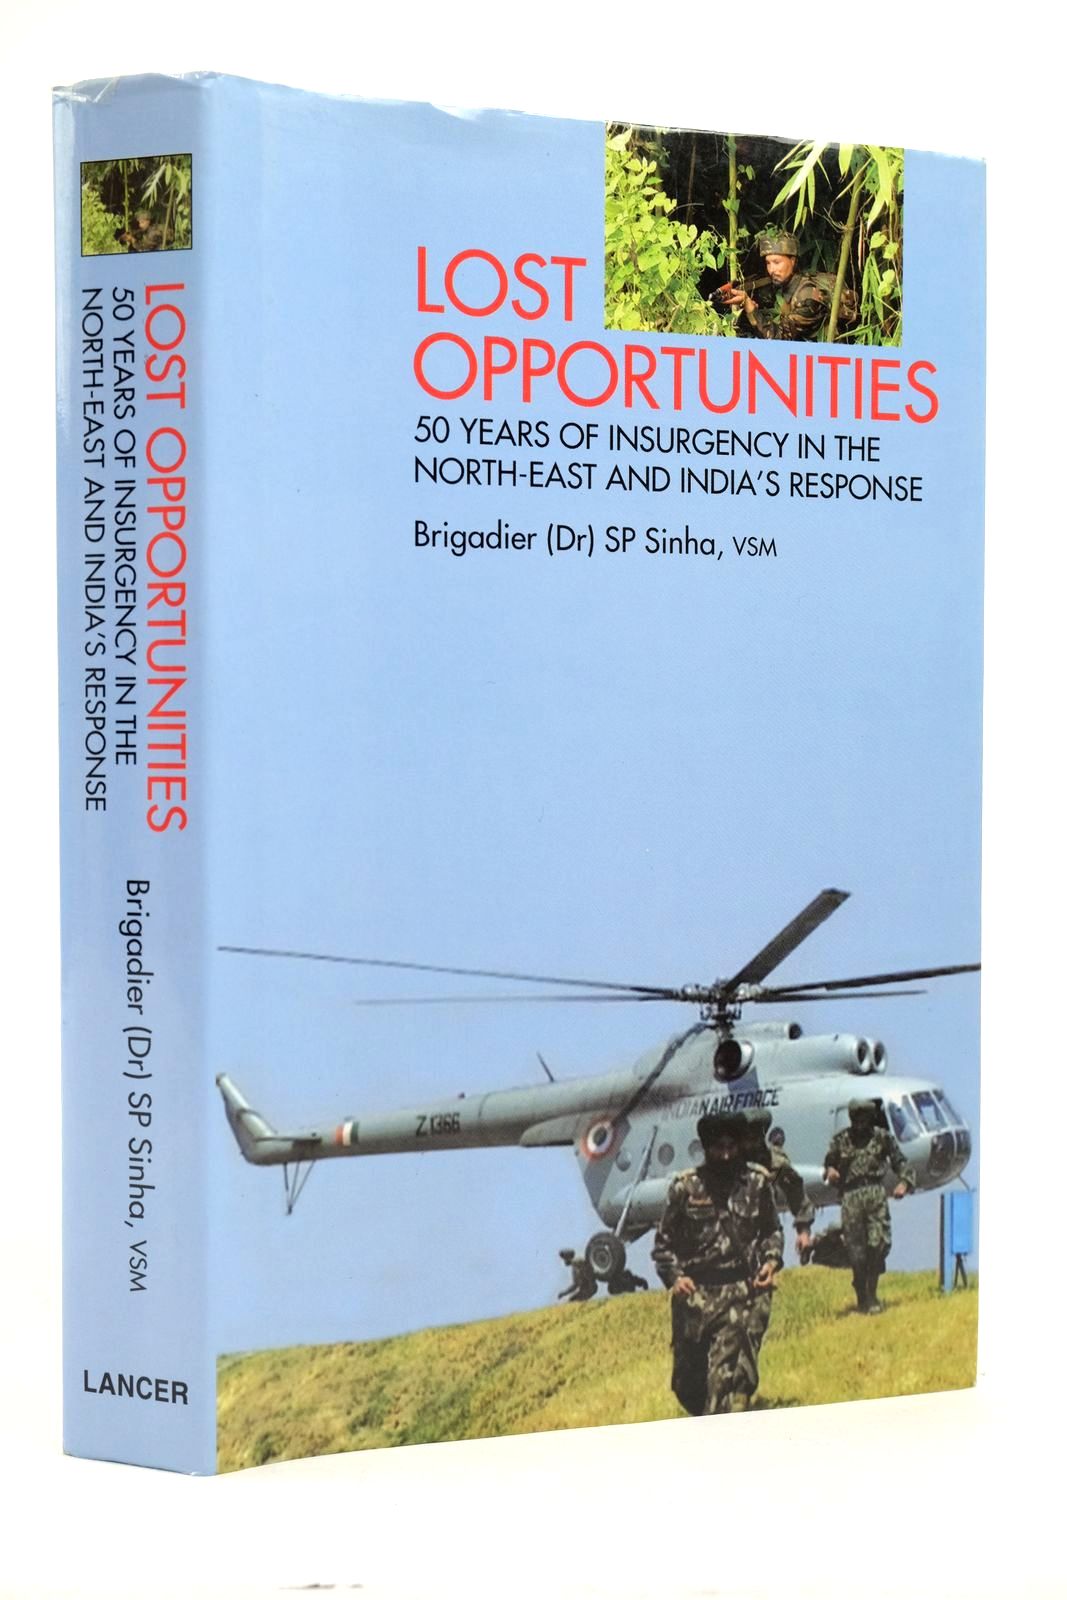 Photo of LOST OPPORTUNITIES: 50 YEARS OF INSURGENCY IN THE NORTH-EAST AND INDIA'S REPONSE- Stock Number: 2139583